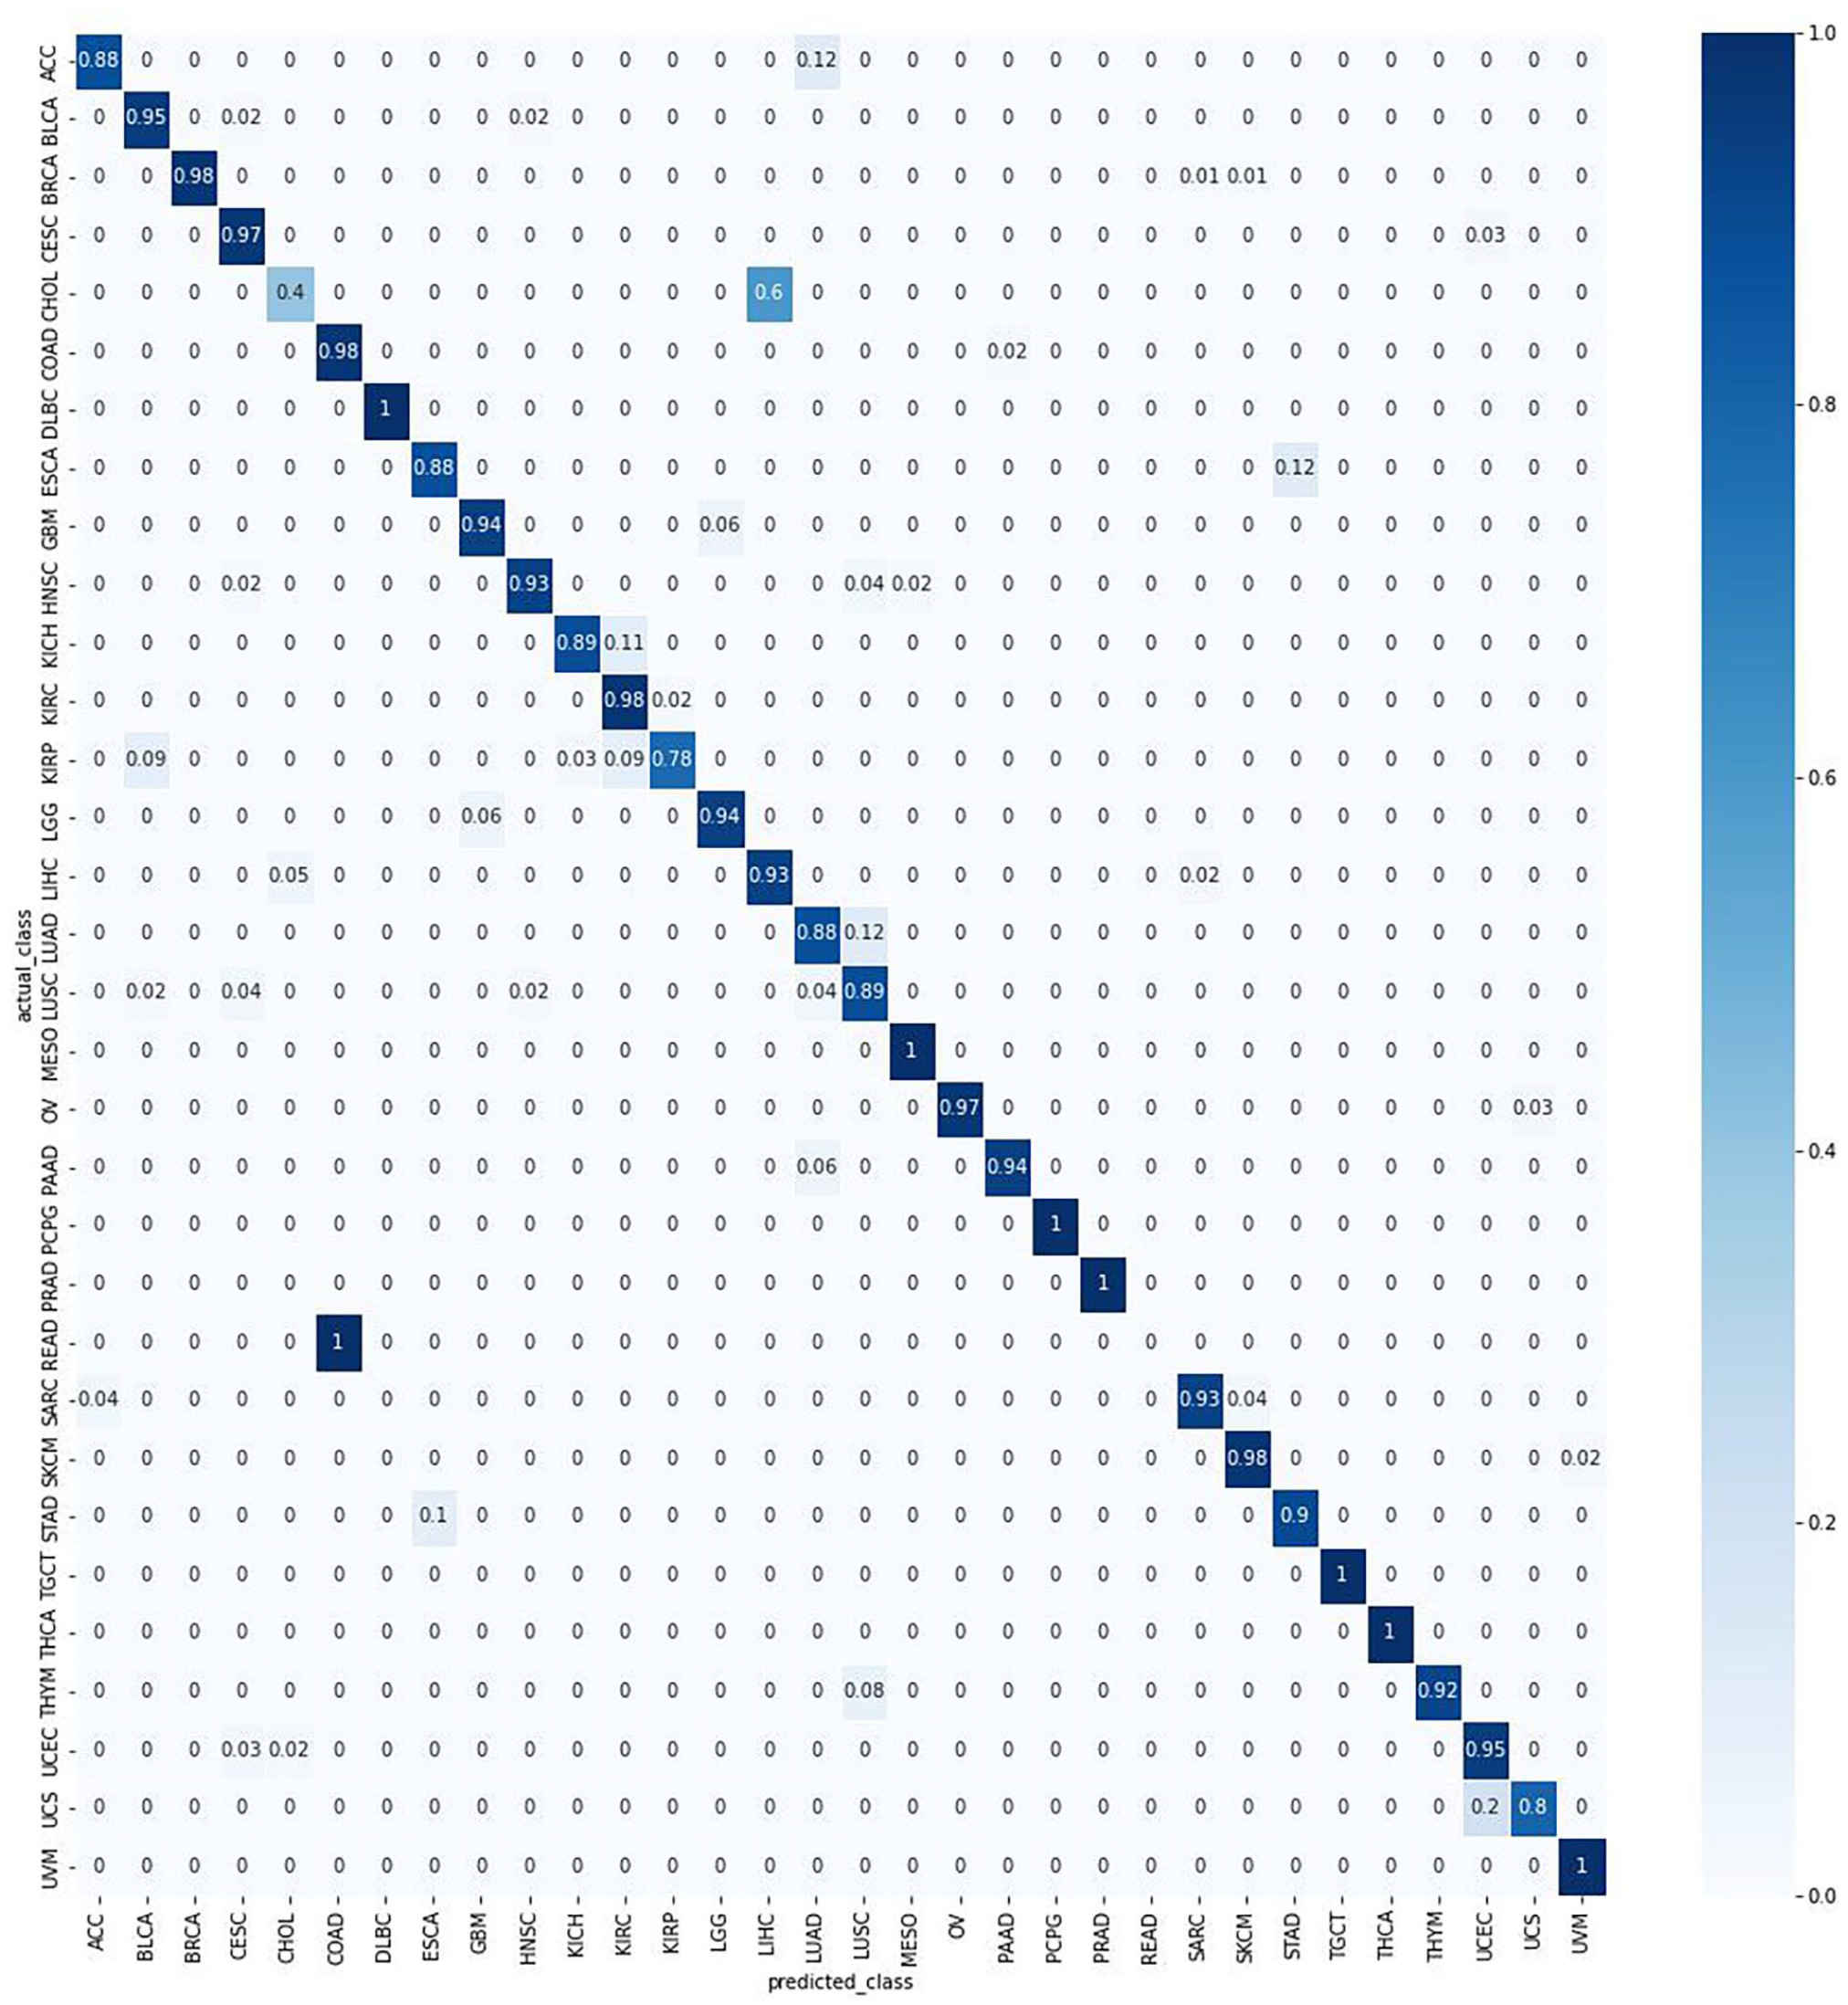 Confusion matrix of accuracy for 32 primary tumor types (X axis) and protein coding genes (Y axis). For the CNN-32 and CNN-32-PC models, the test accuracy was above 80% for 28 and 29 primary tumor types respectively and 90% for 25 primary tumor types. The primary tumor types with an accuracy of below 80% shared between both models include CHOL at 40% and READ at 0%.